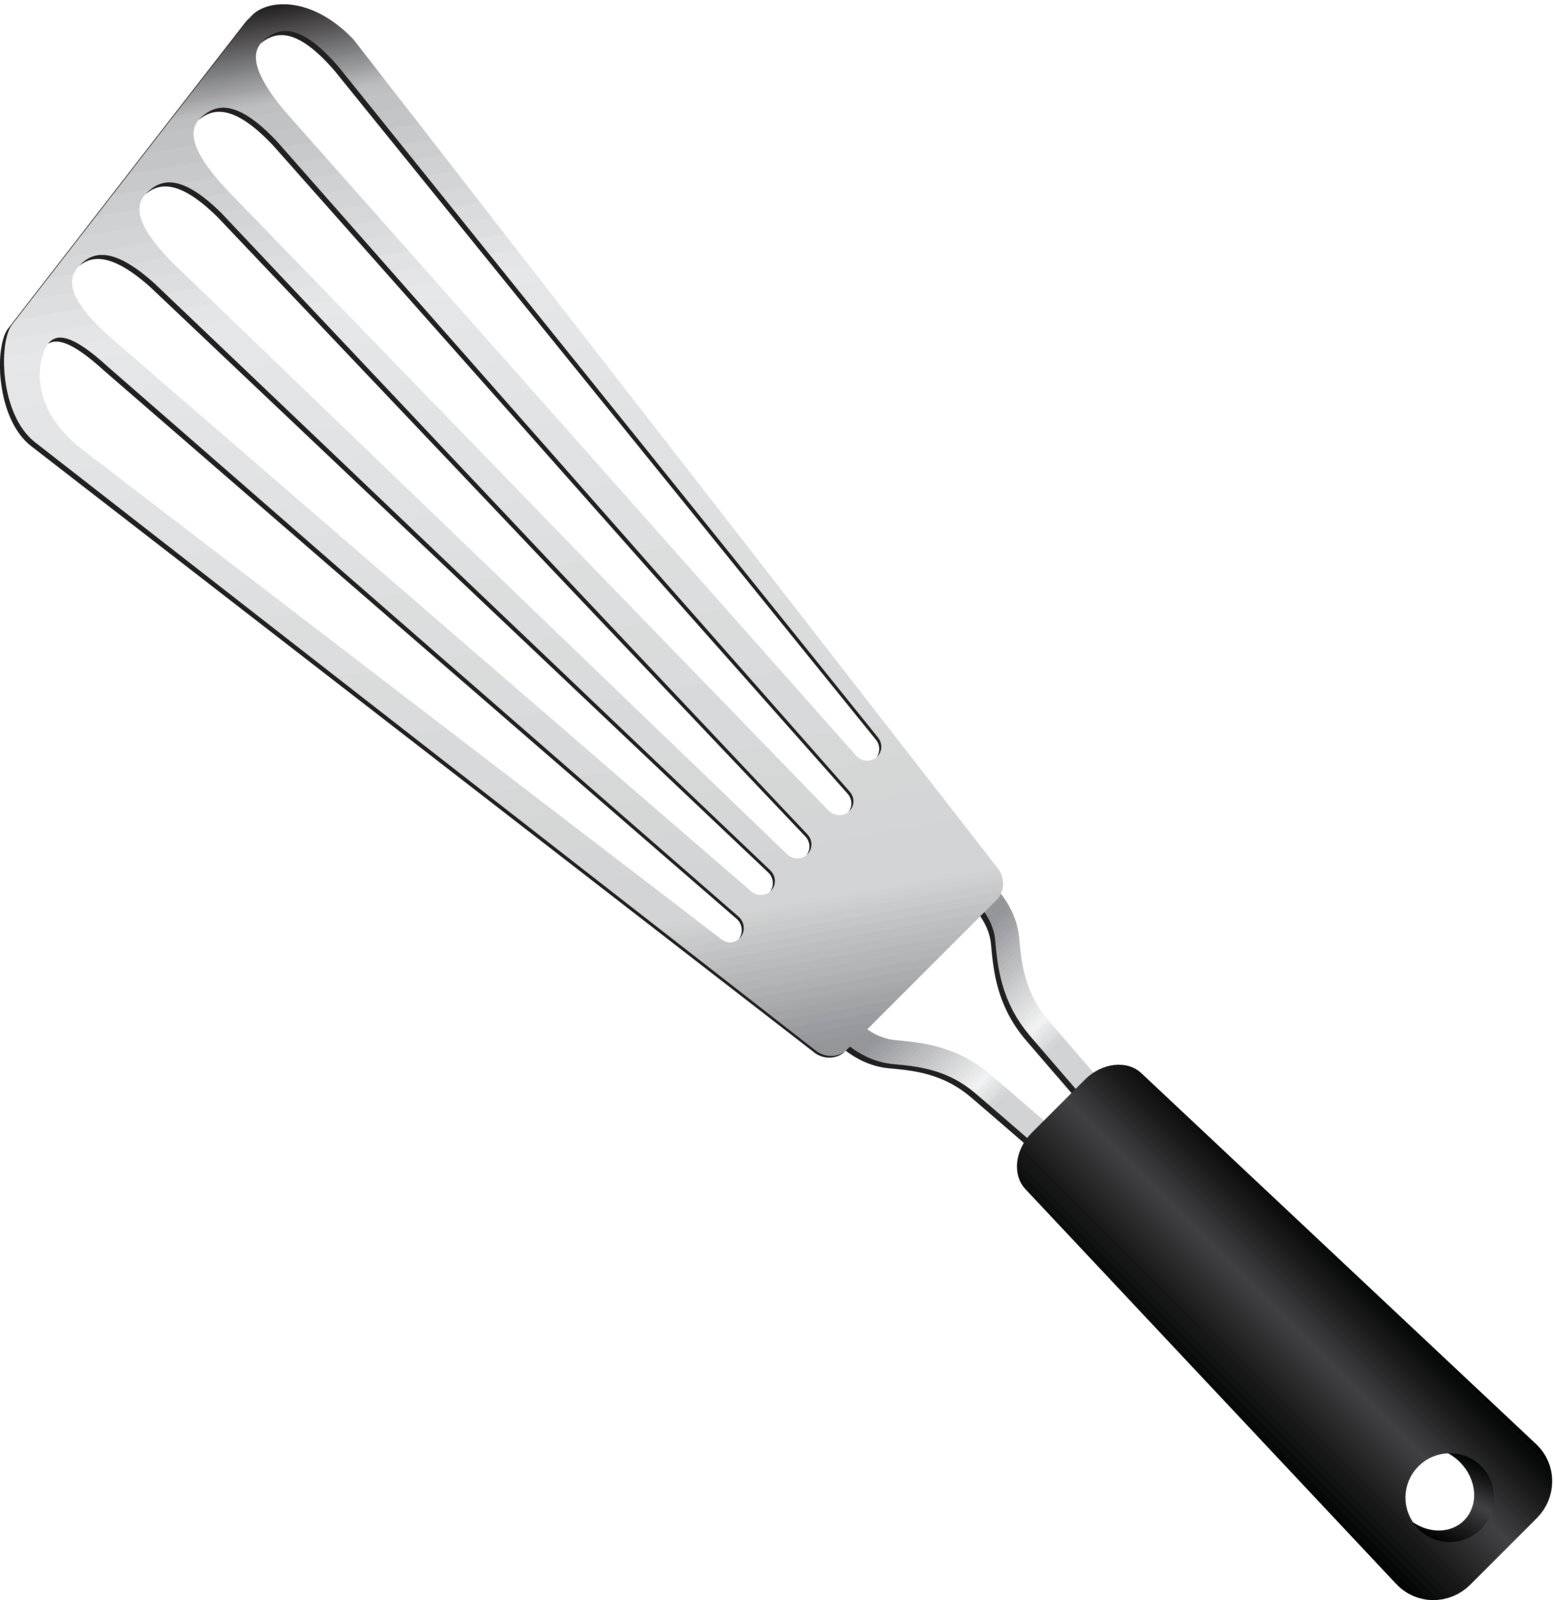 Stainless steel spatula on white background. Vector illustration.